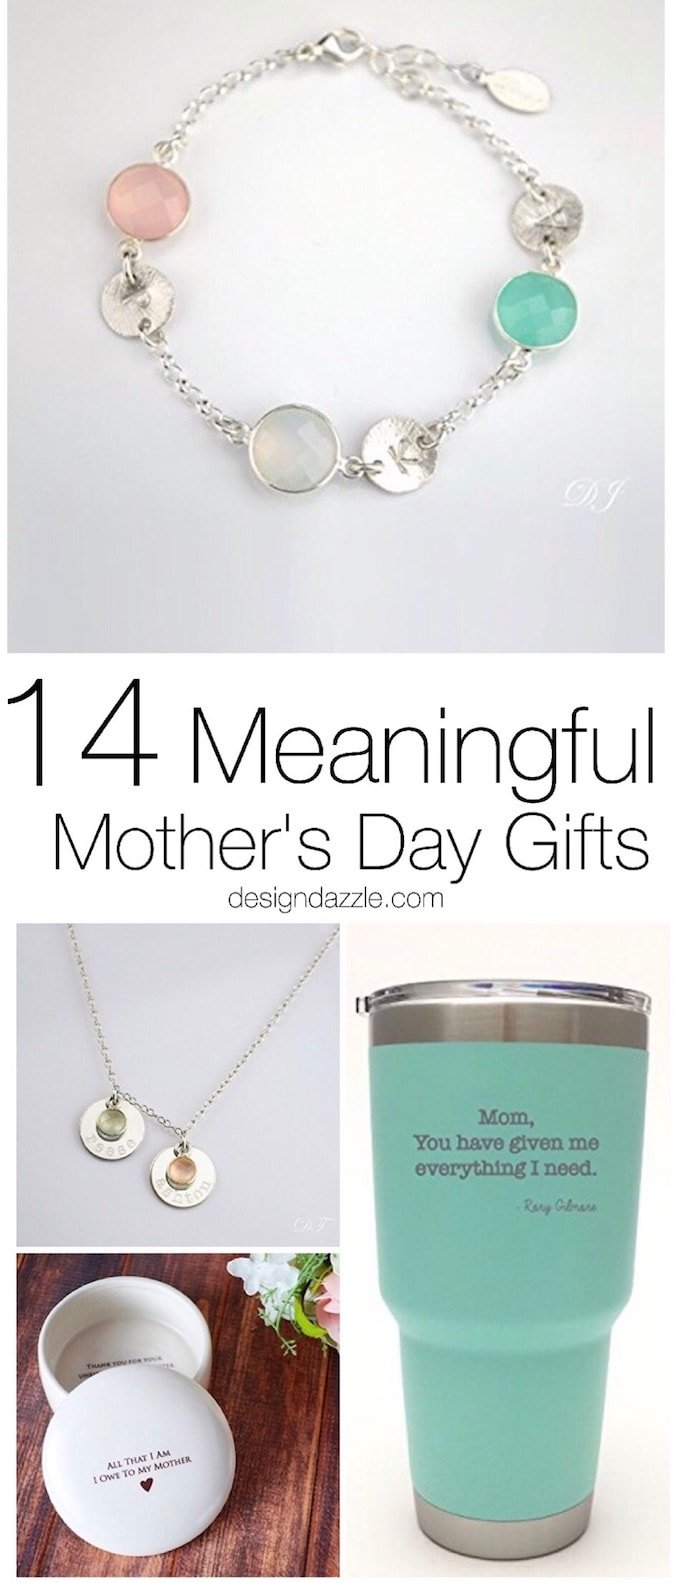 From engraved necklaces to custom photo phone cases, these 14 meaningful Mothers Day gifts will be sure to put a huge smile on your mom's face! | Design Dazzle